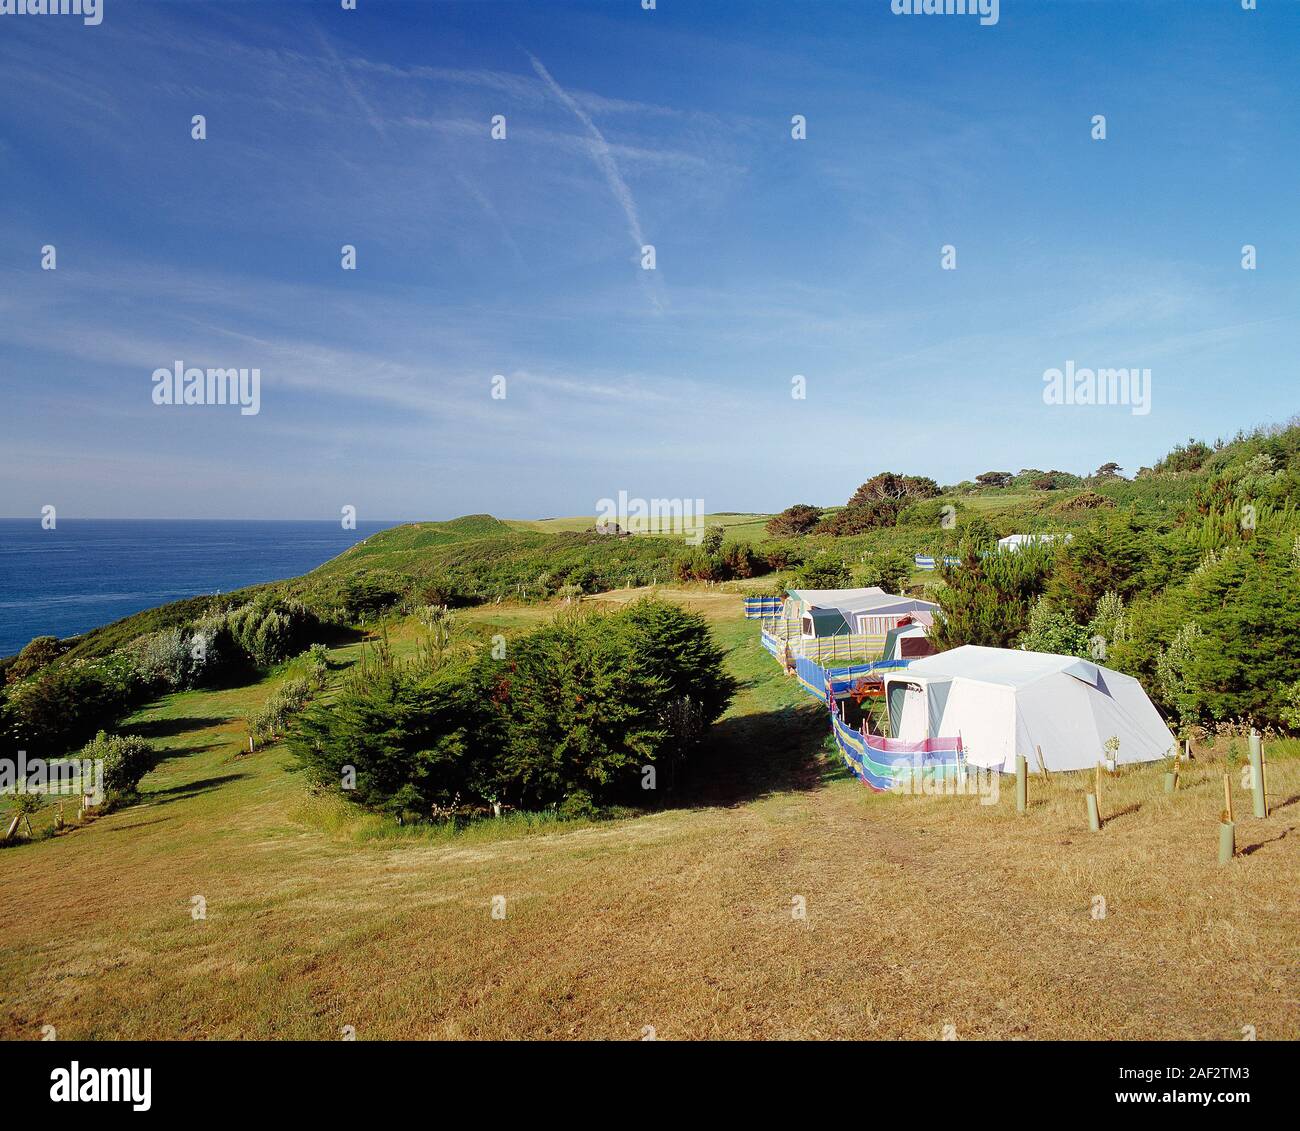 Channel Isles. Guernsey. Herm Island. Campsite with tents. Stock Photo